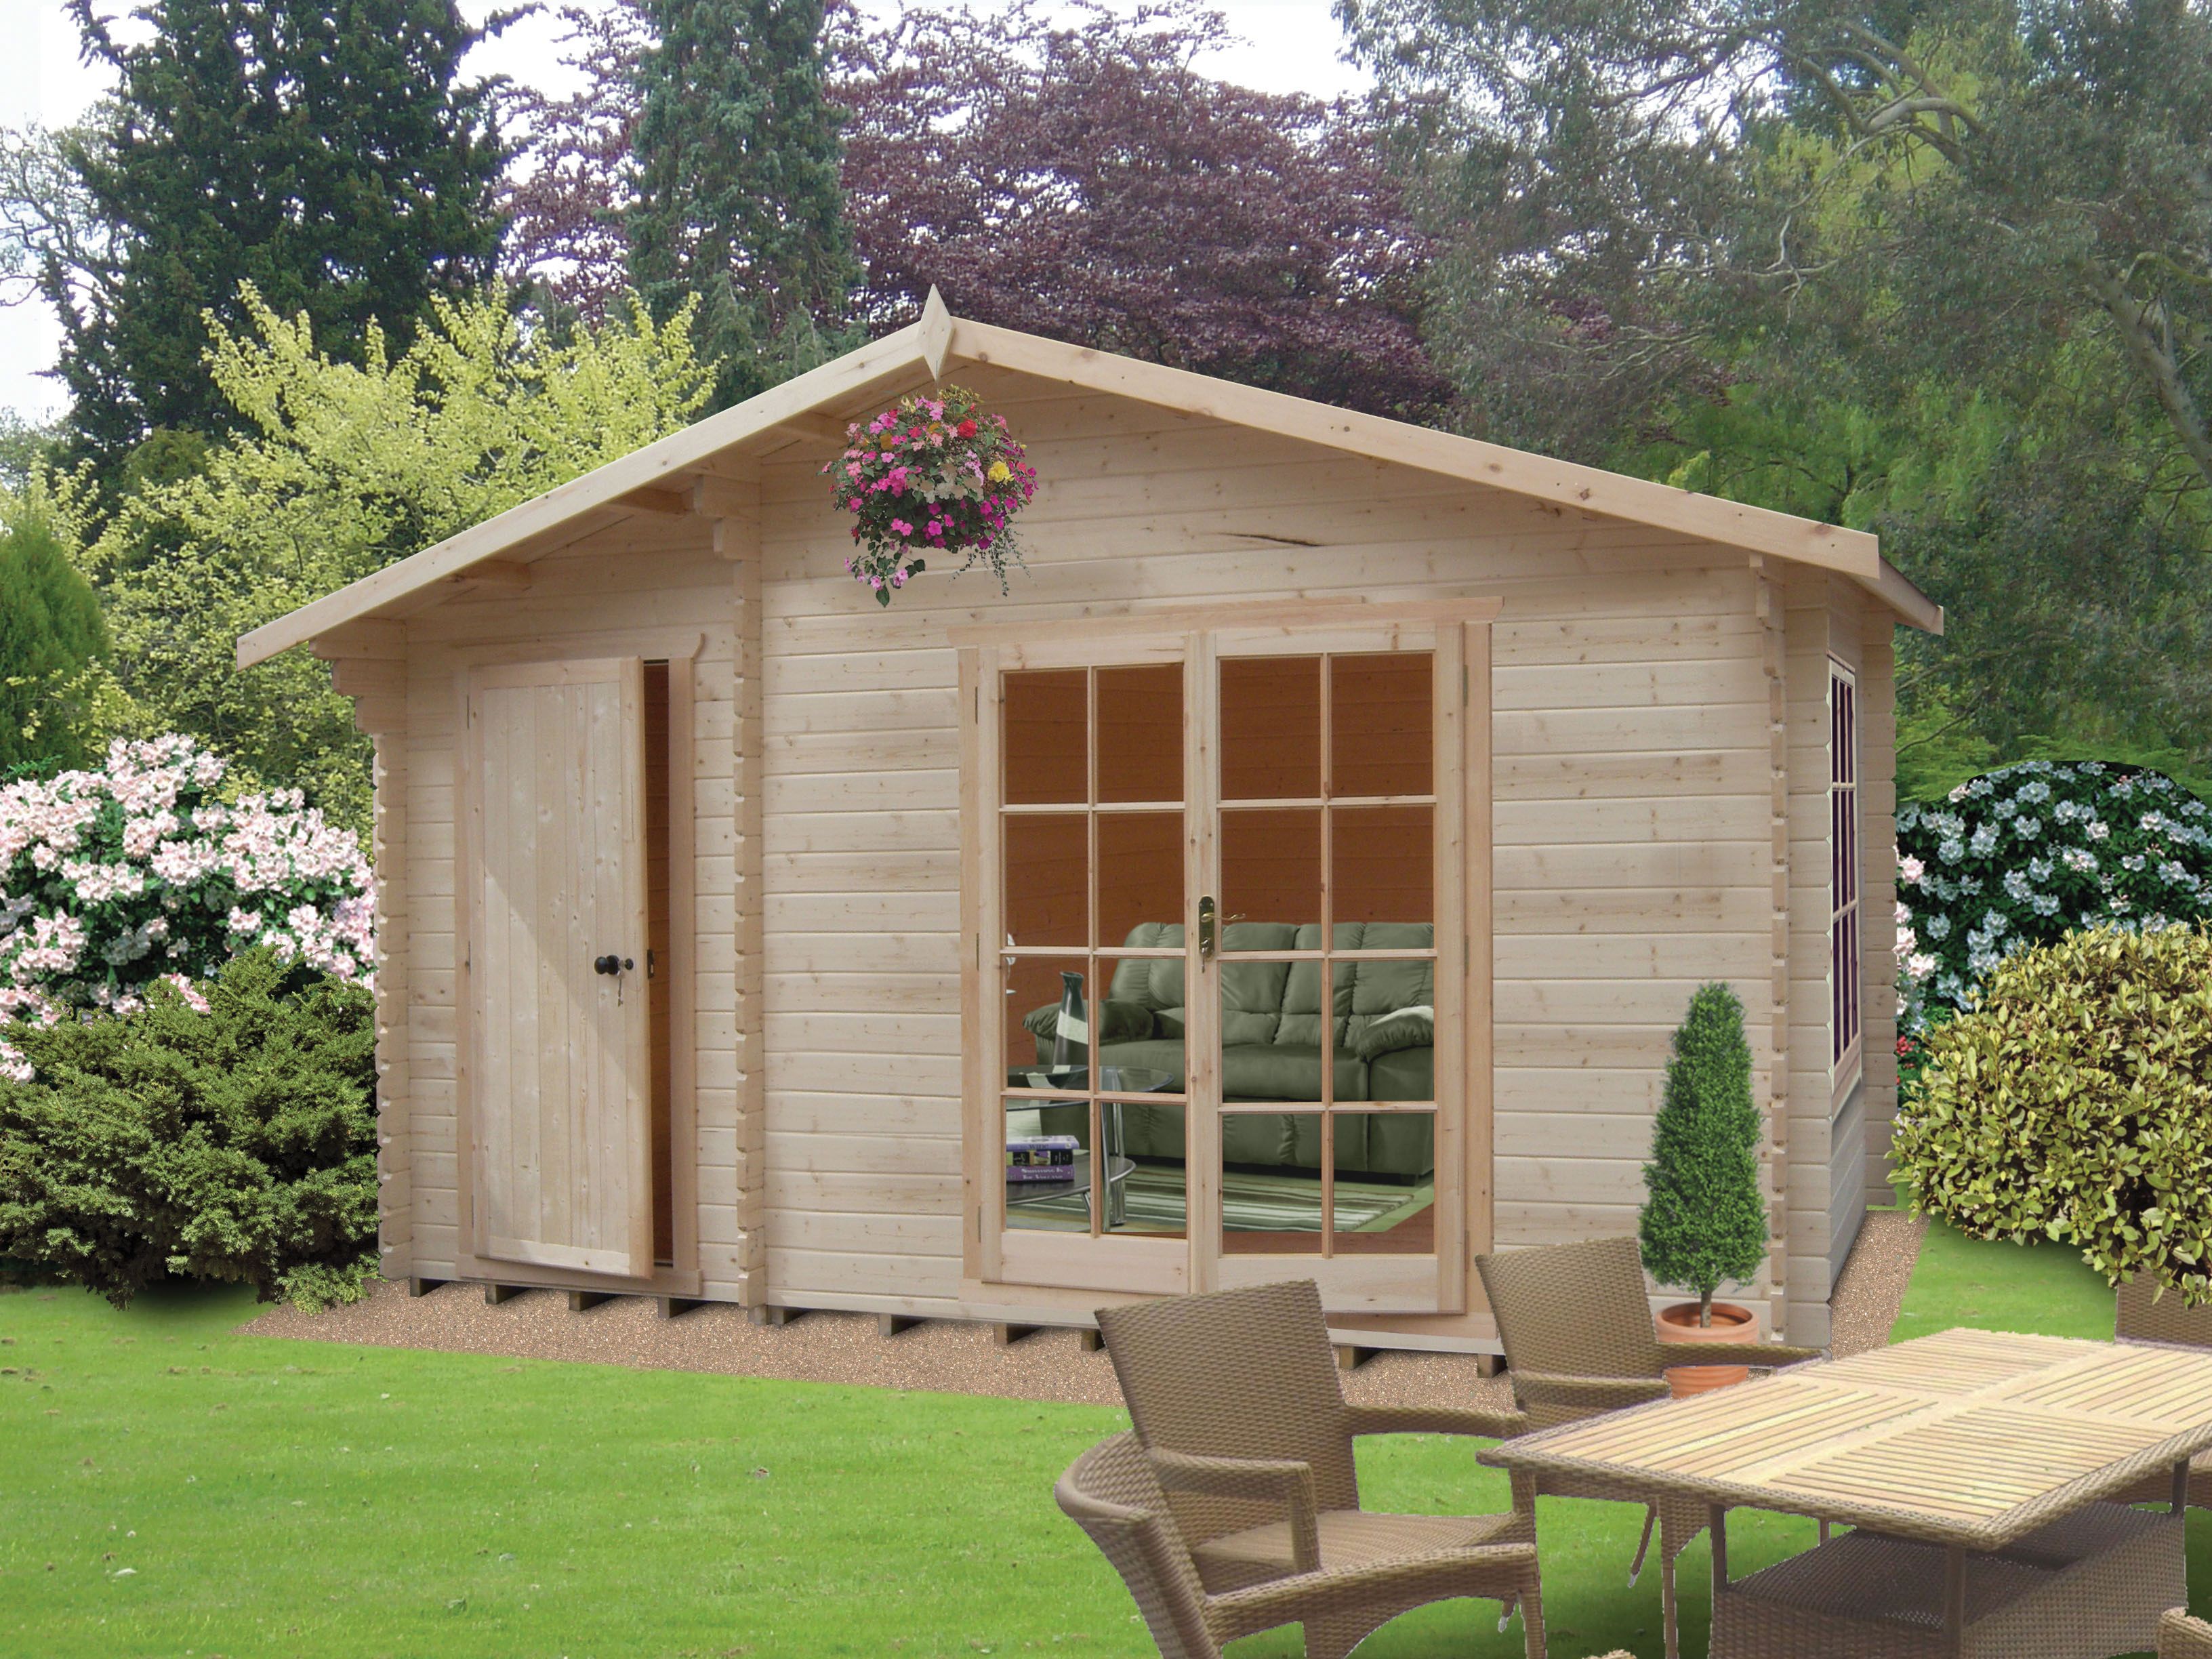 Image of Shire Bourne 14 x 10ft Double Door Log Cabin including Storage Room with Assembly